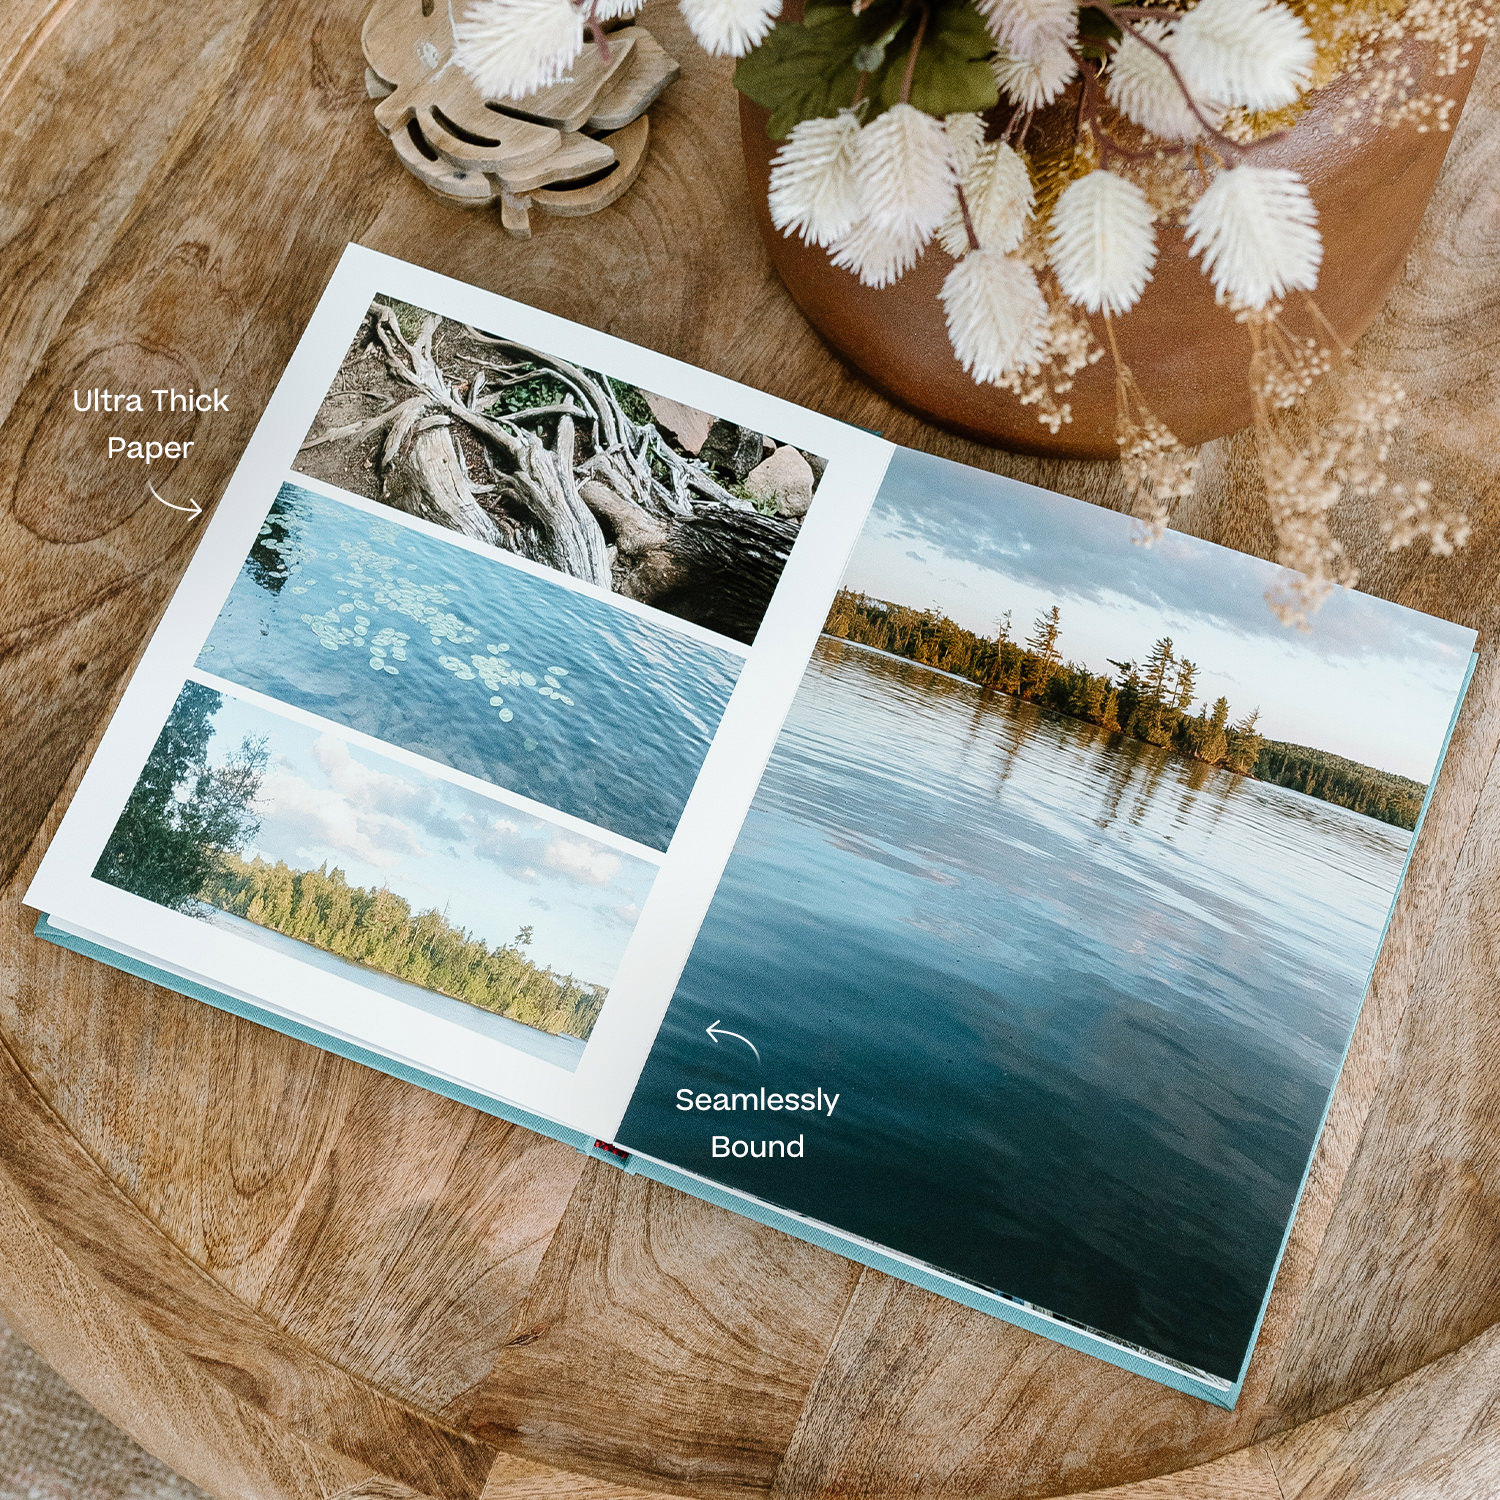 Layflat Photo Album | The best layflat photo book you can make on